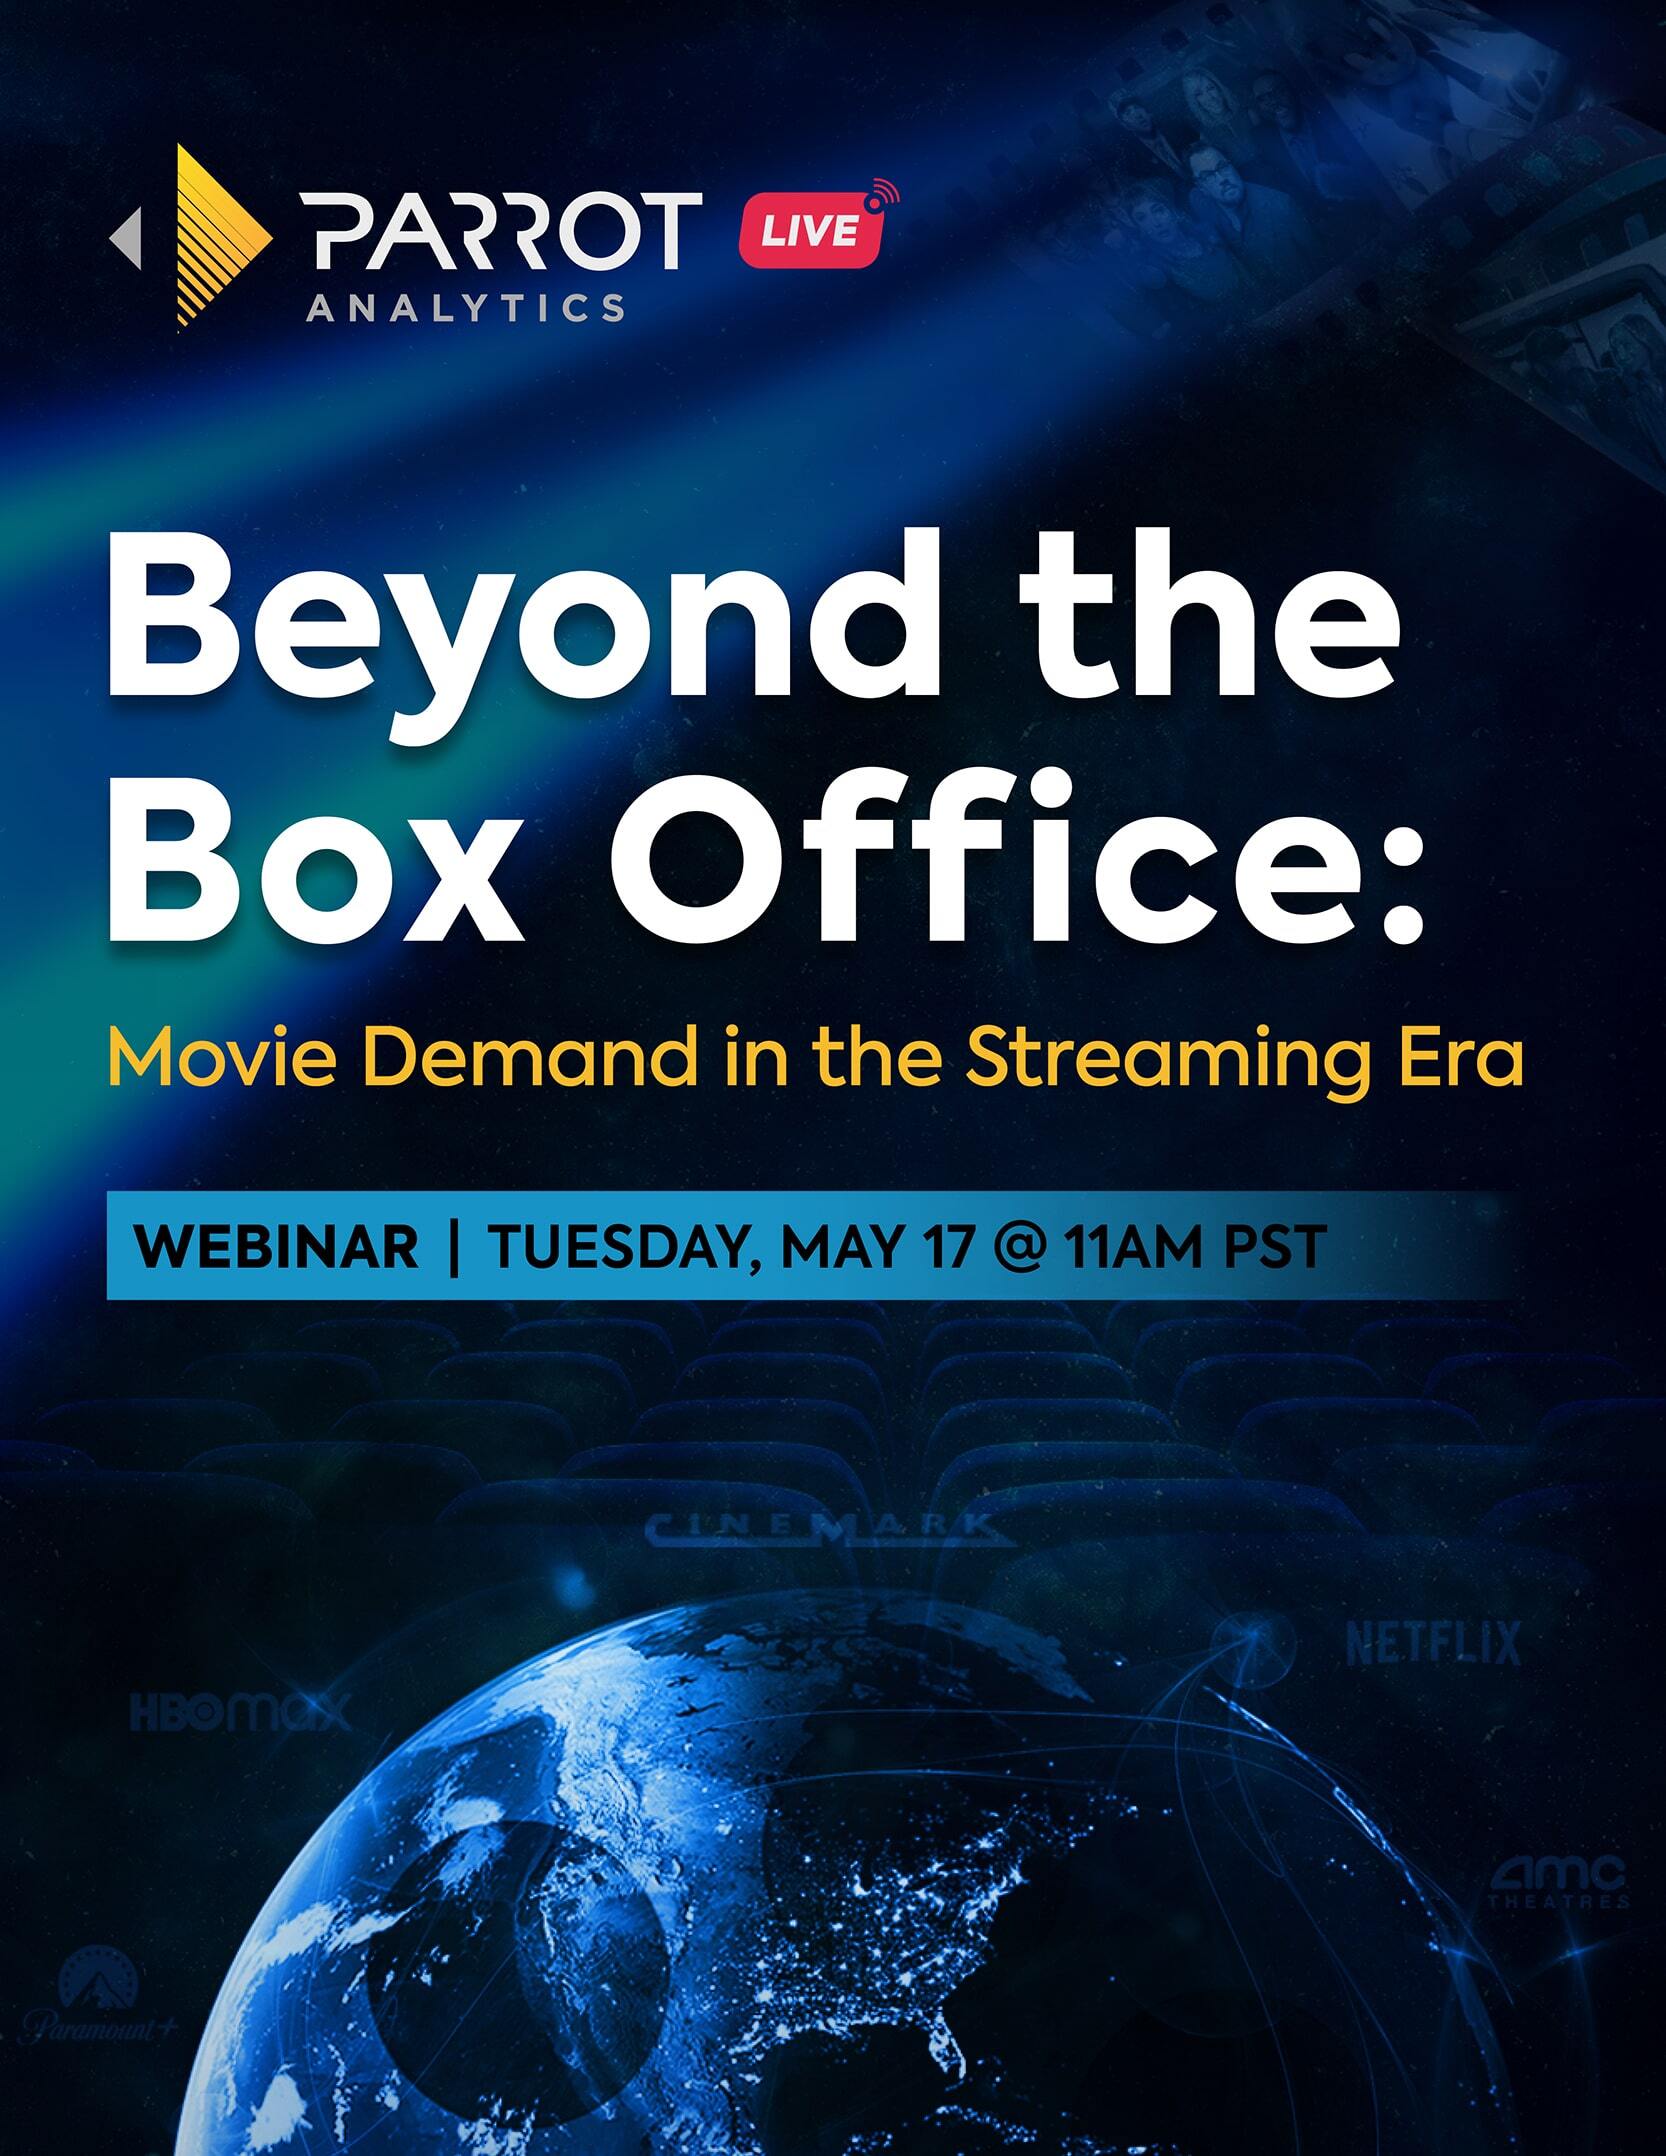 Parrot Analytics LIVE: Beyond the Box Office - Measuring Movie Demand in the Streaming Era